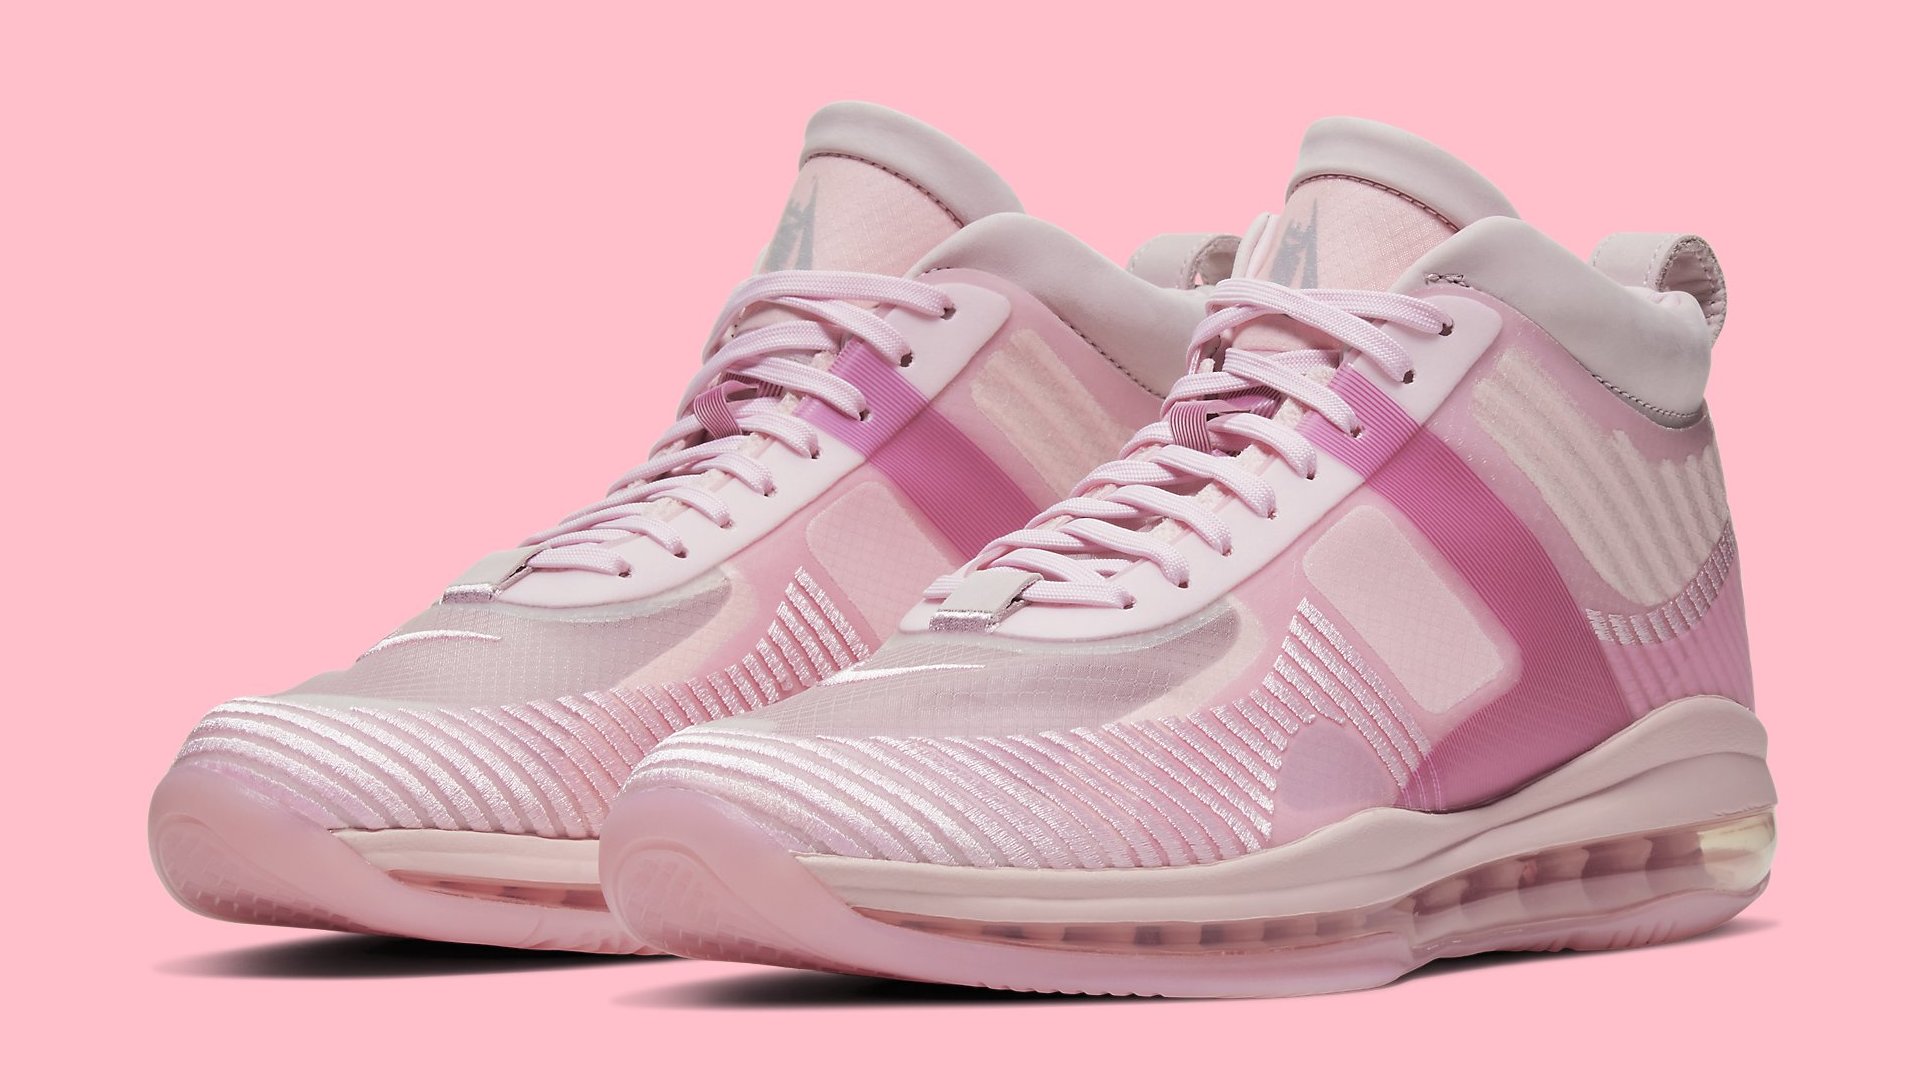 Ánimo rescate Bandido An Official Look at the 'Tulip Pink' John Elliott x Nike LeBron Icon |  Complex